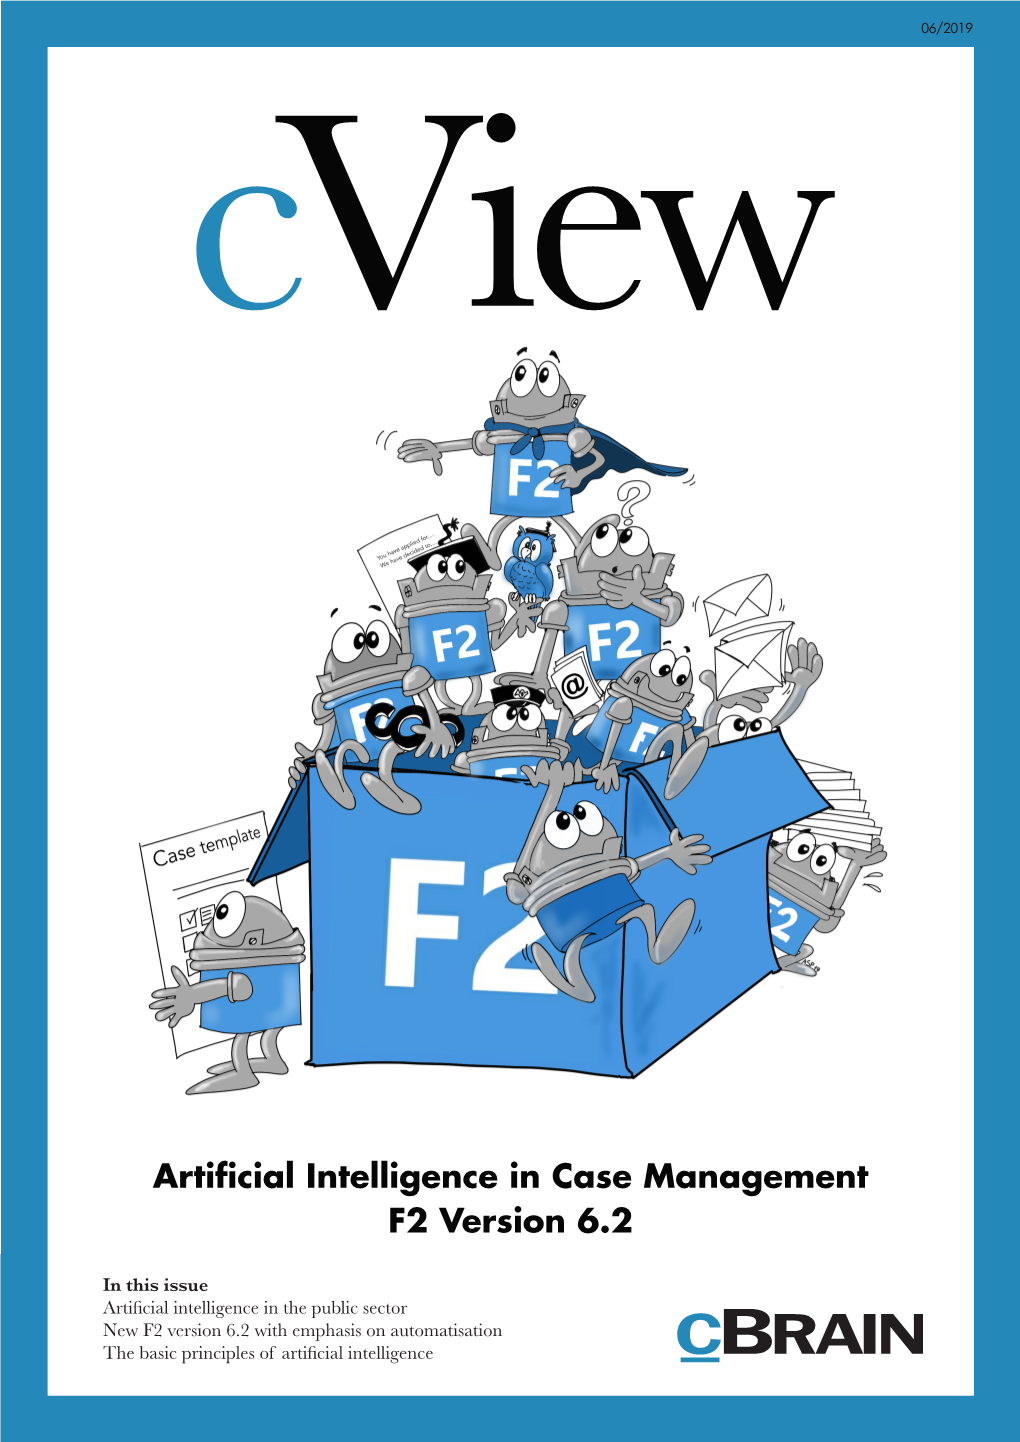 Artificial Intelligence in Case Management F2 Version 6.2